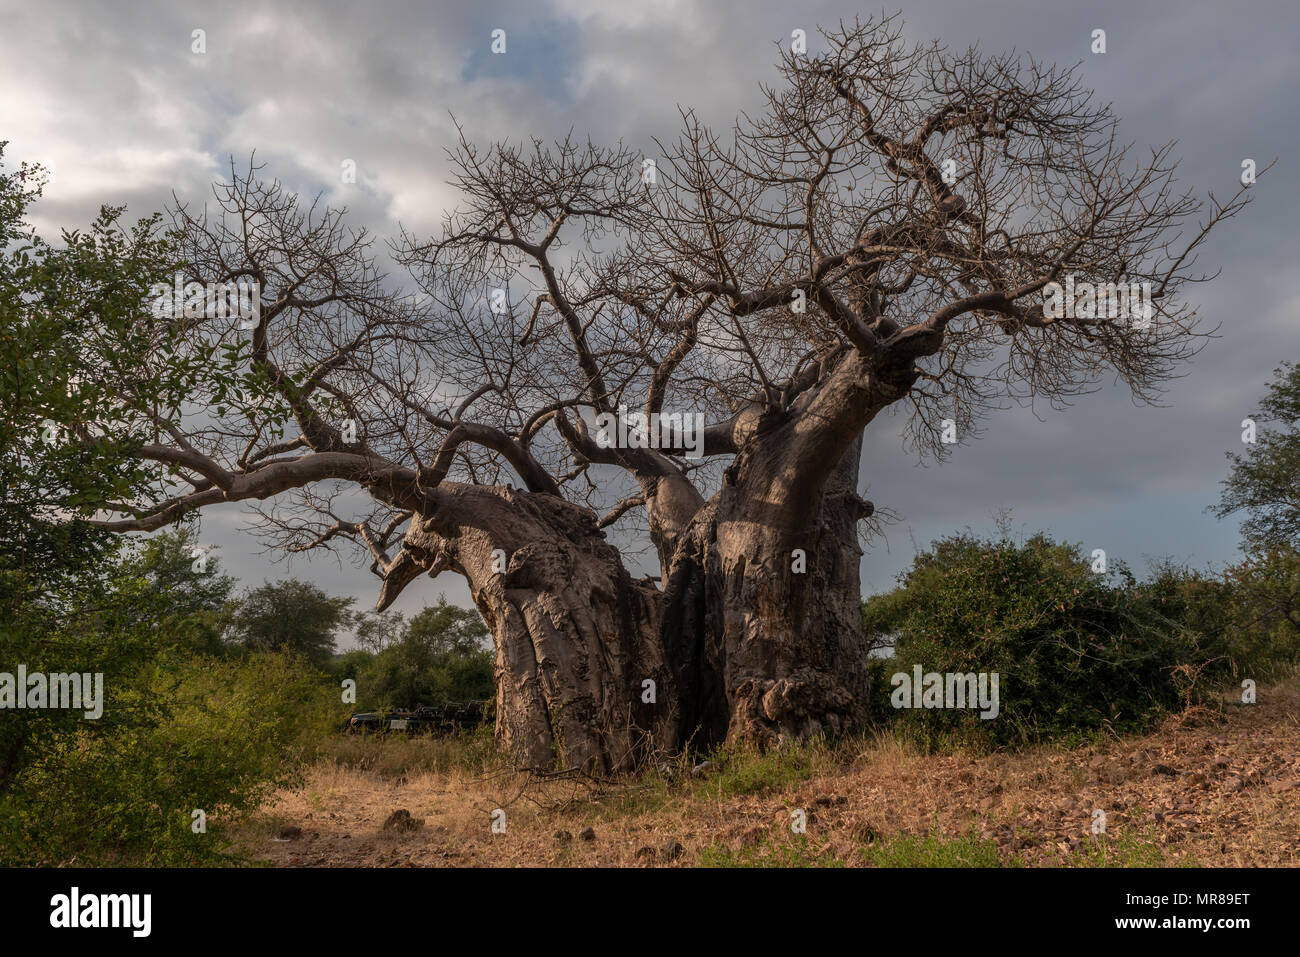 One of the Largest specimens of The Baobab Tree Stock Photo